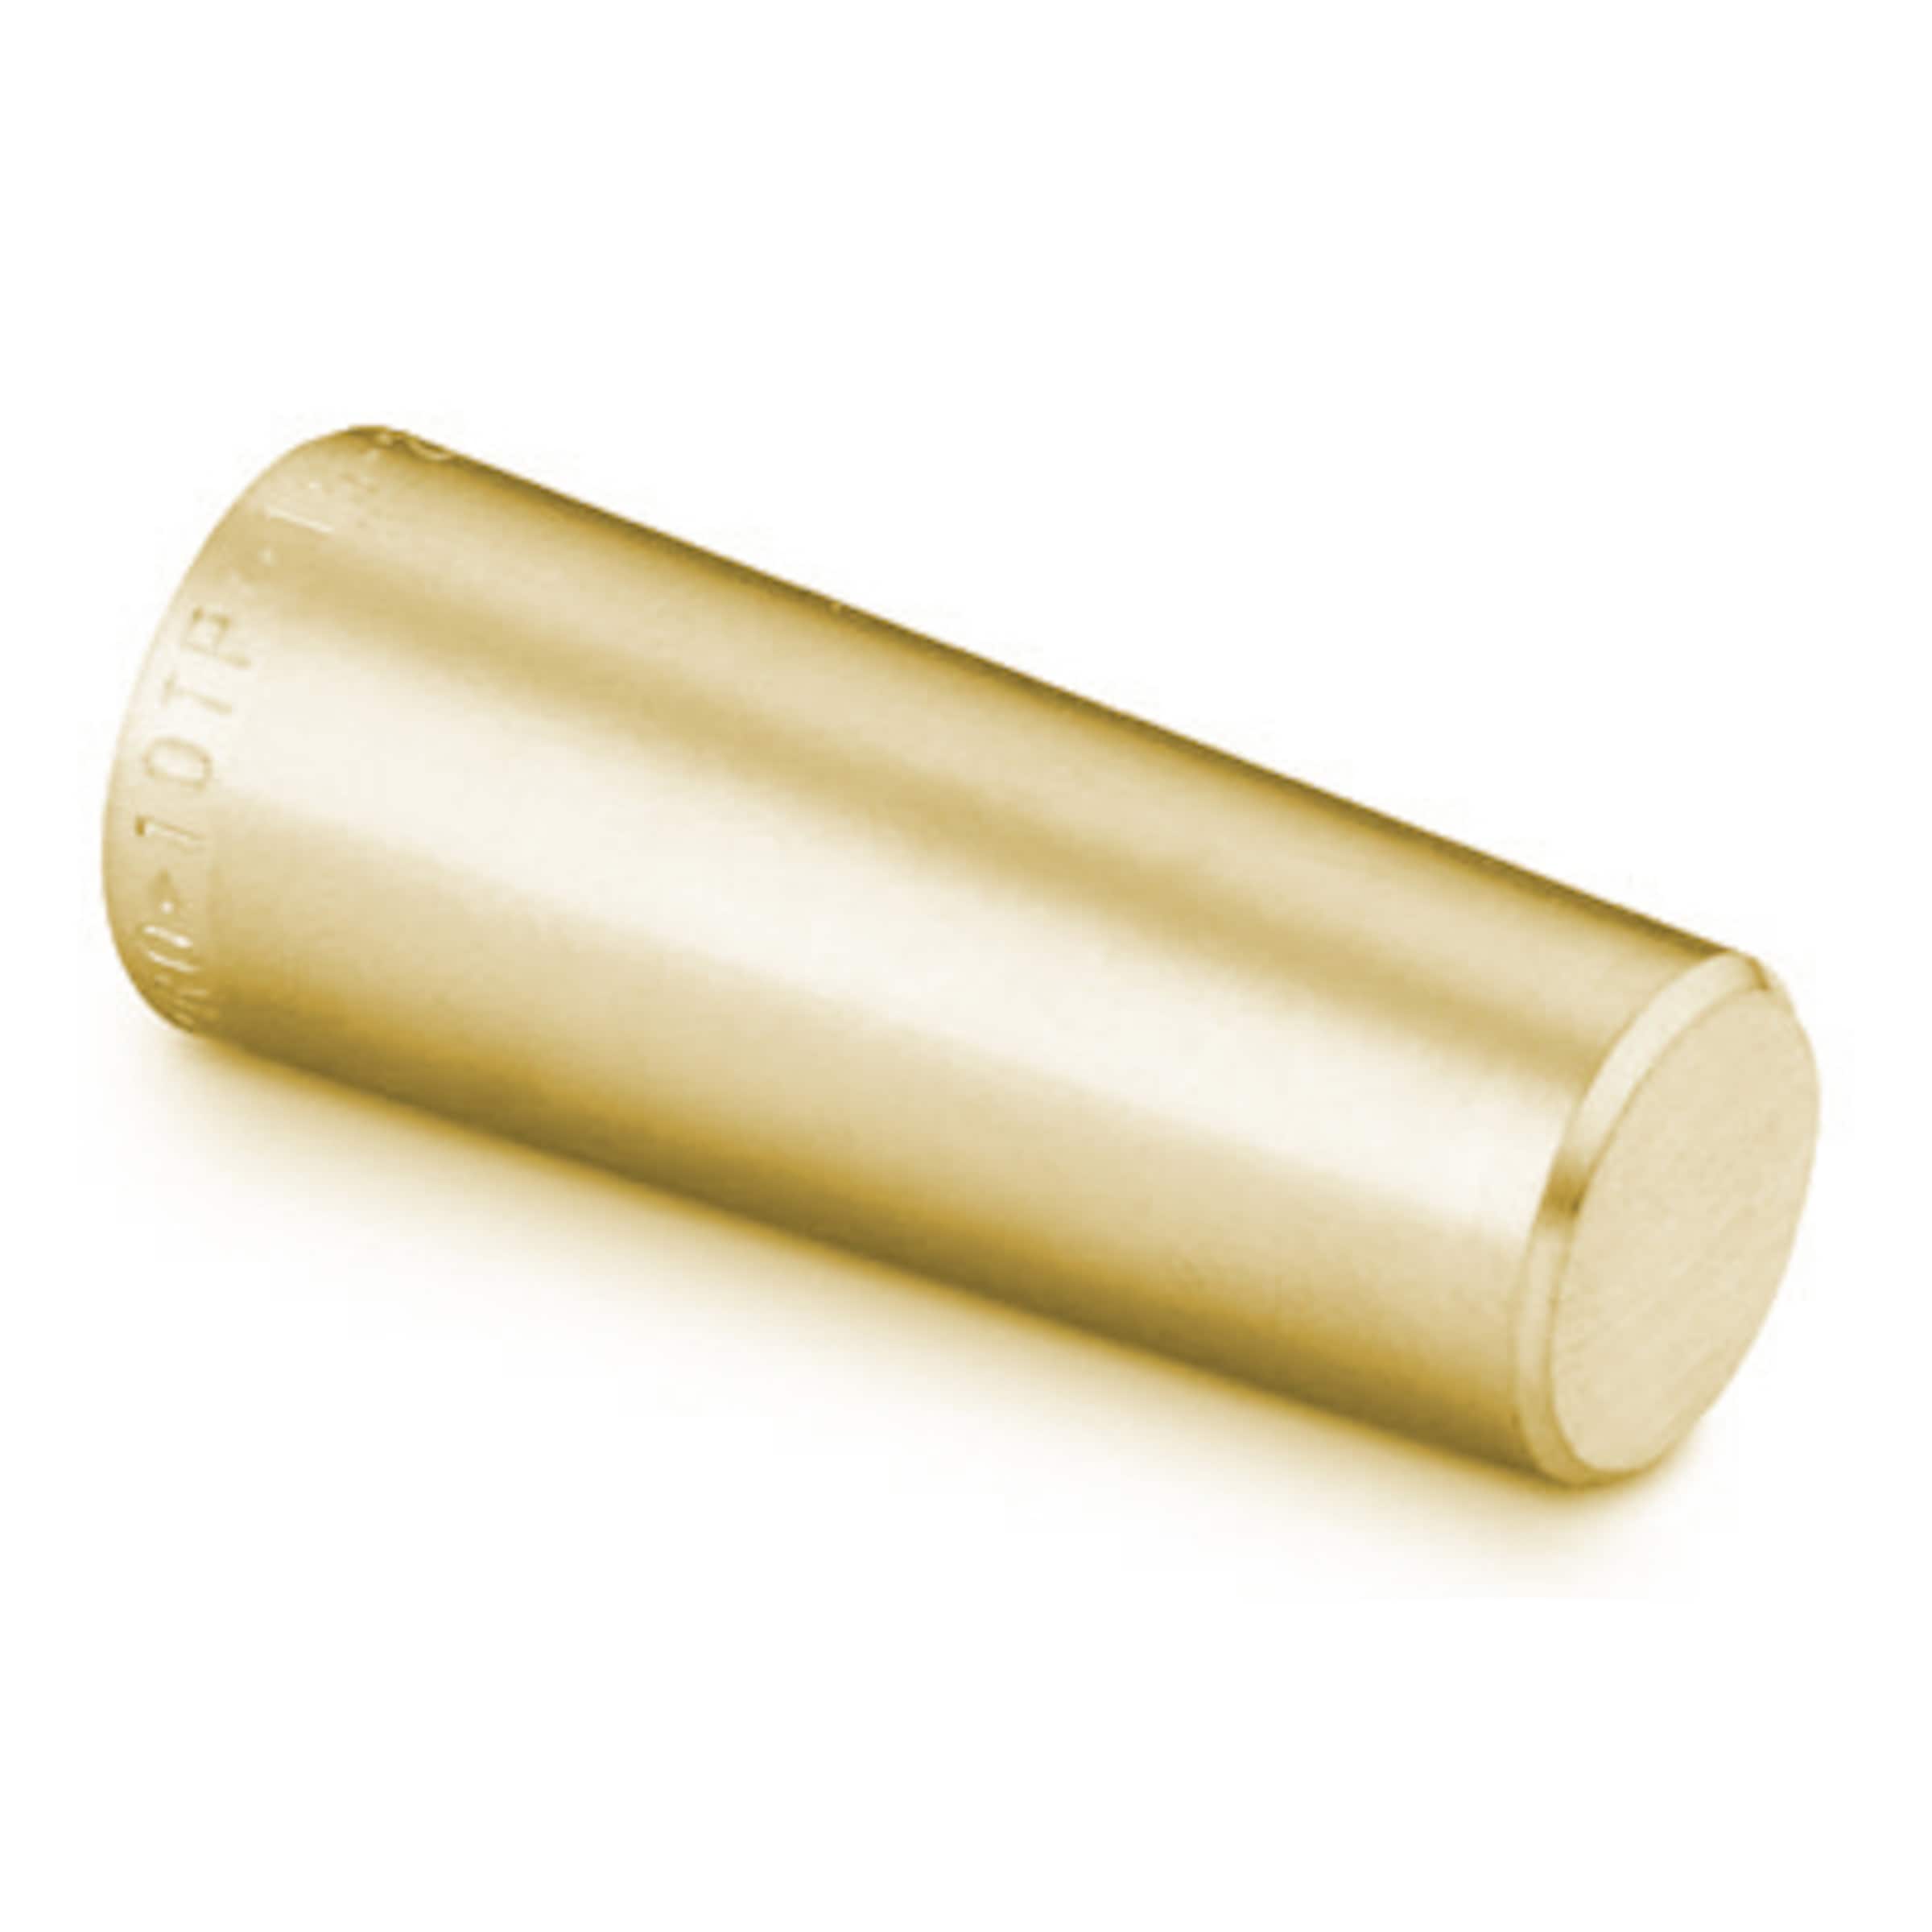 Brass Heat Exchanger Tube Plug, 3/4 in. OD, 15 to 20 Tube Wall